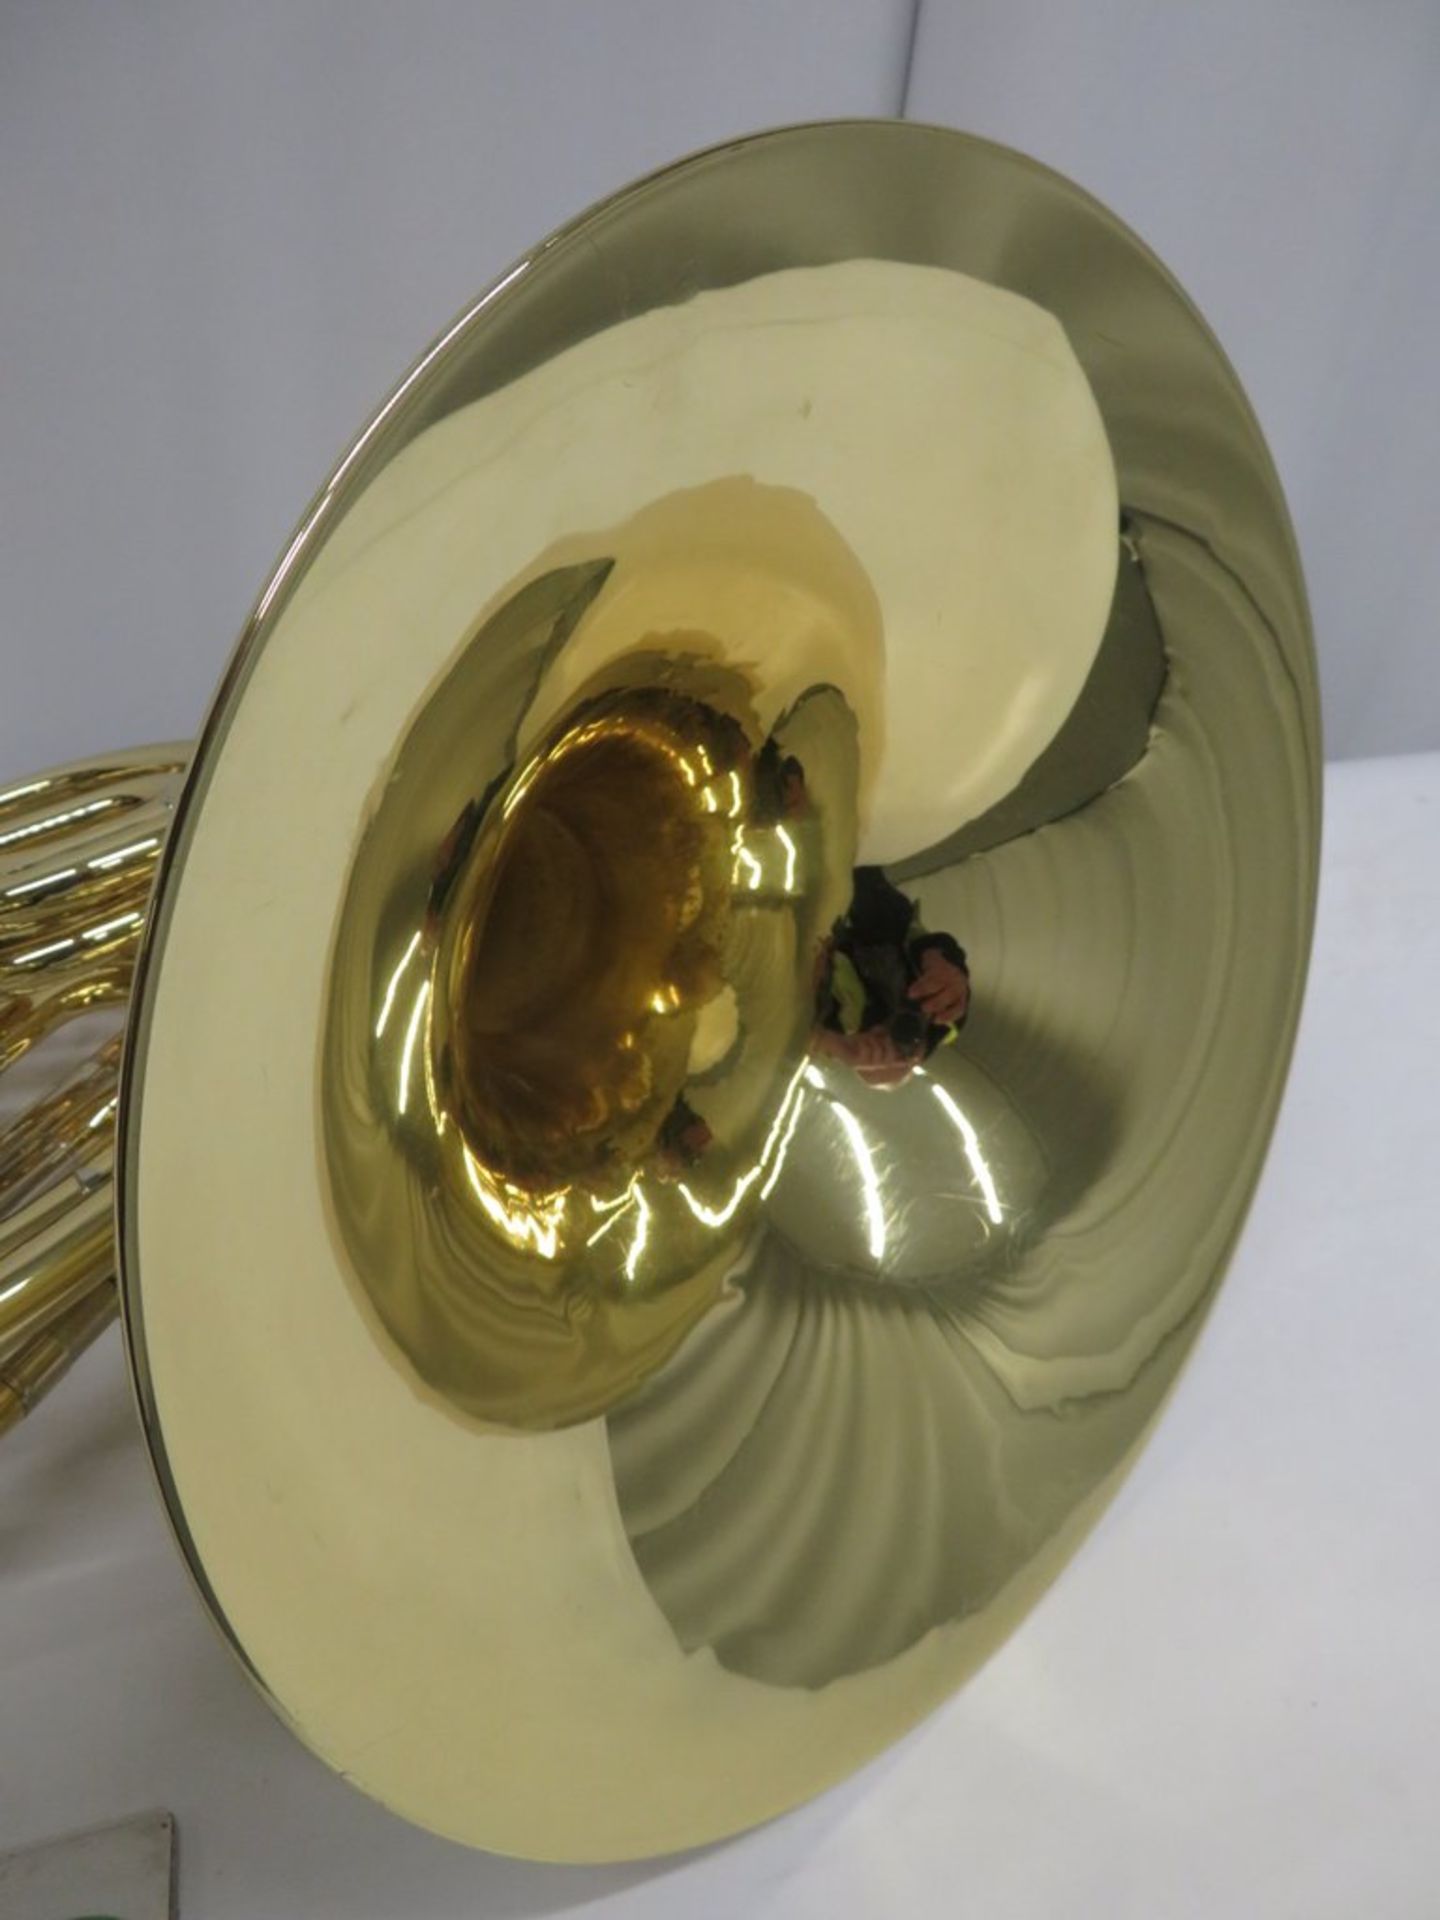 Yamaha YHR 667V French Horn With Case. Serial Number: 001738. This Item Has Not Been Teste - Image 8 of 16